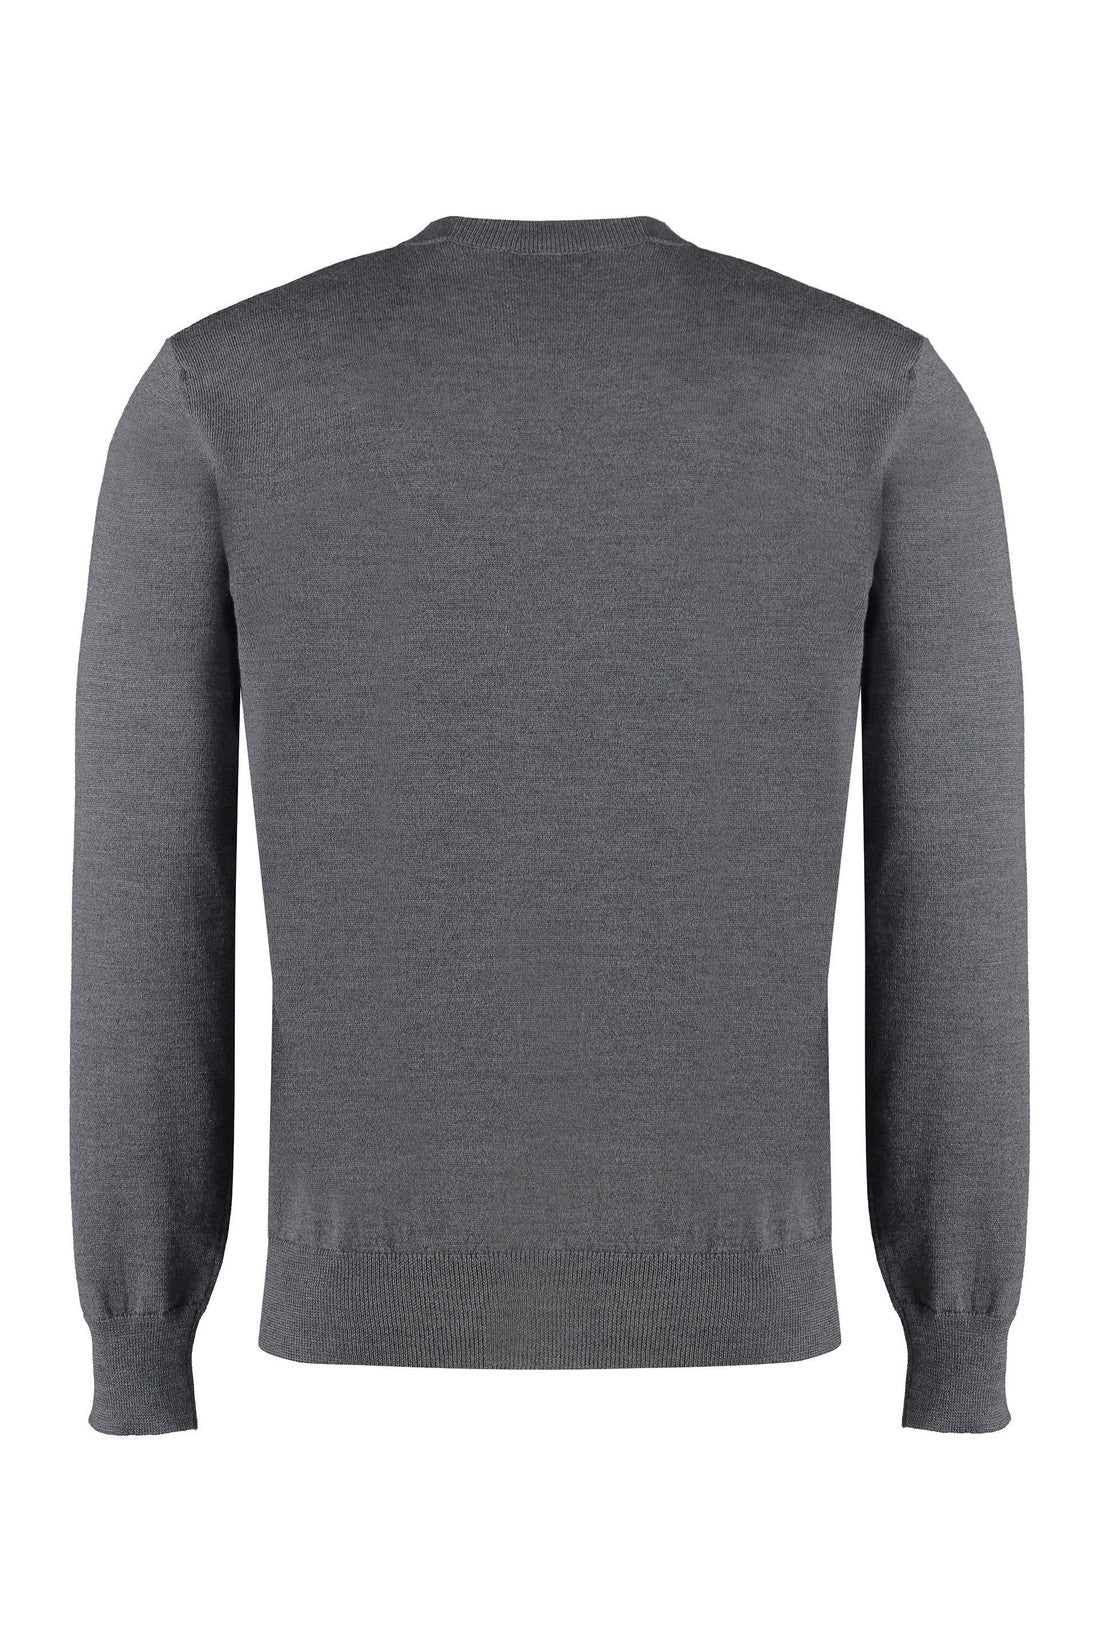 Dsquared2-OUTLET-SALE-Crew-neck wool sweater-ARCHIVIST